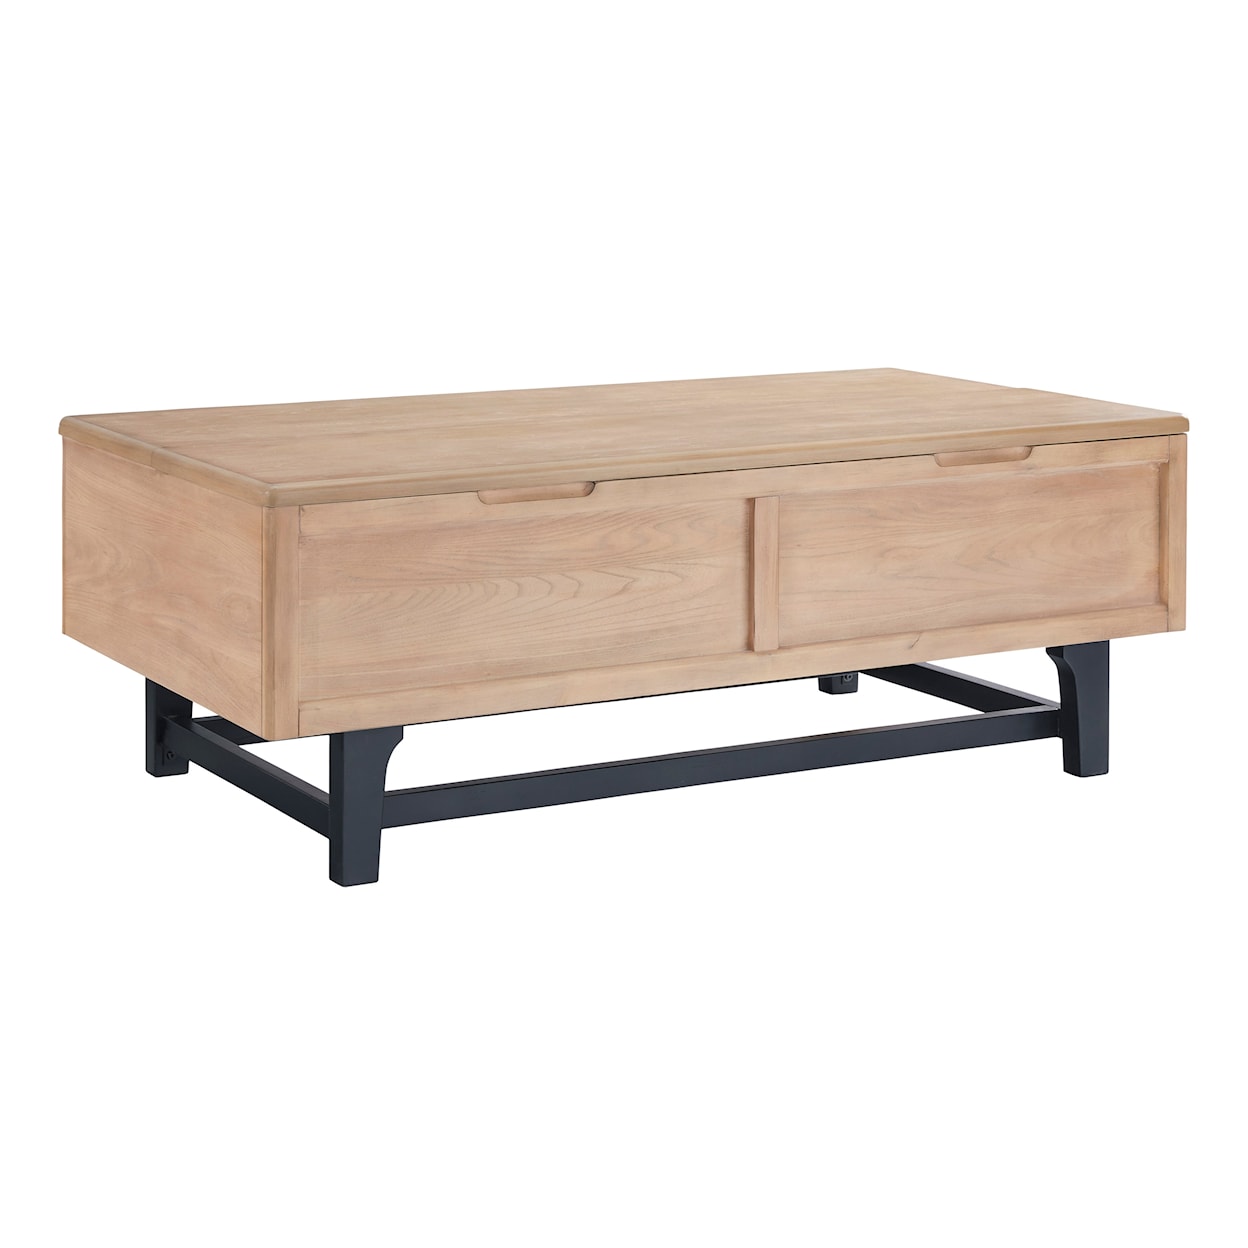 Signature Design by Ashley Freslowe Lift-Top Coffee Table